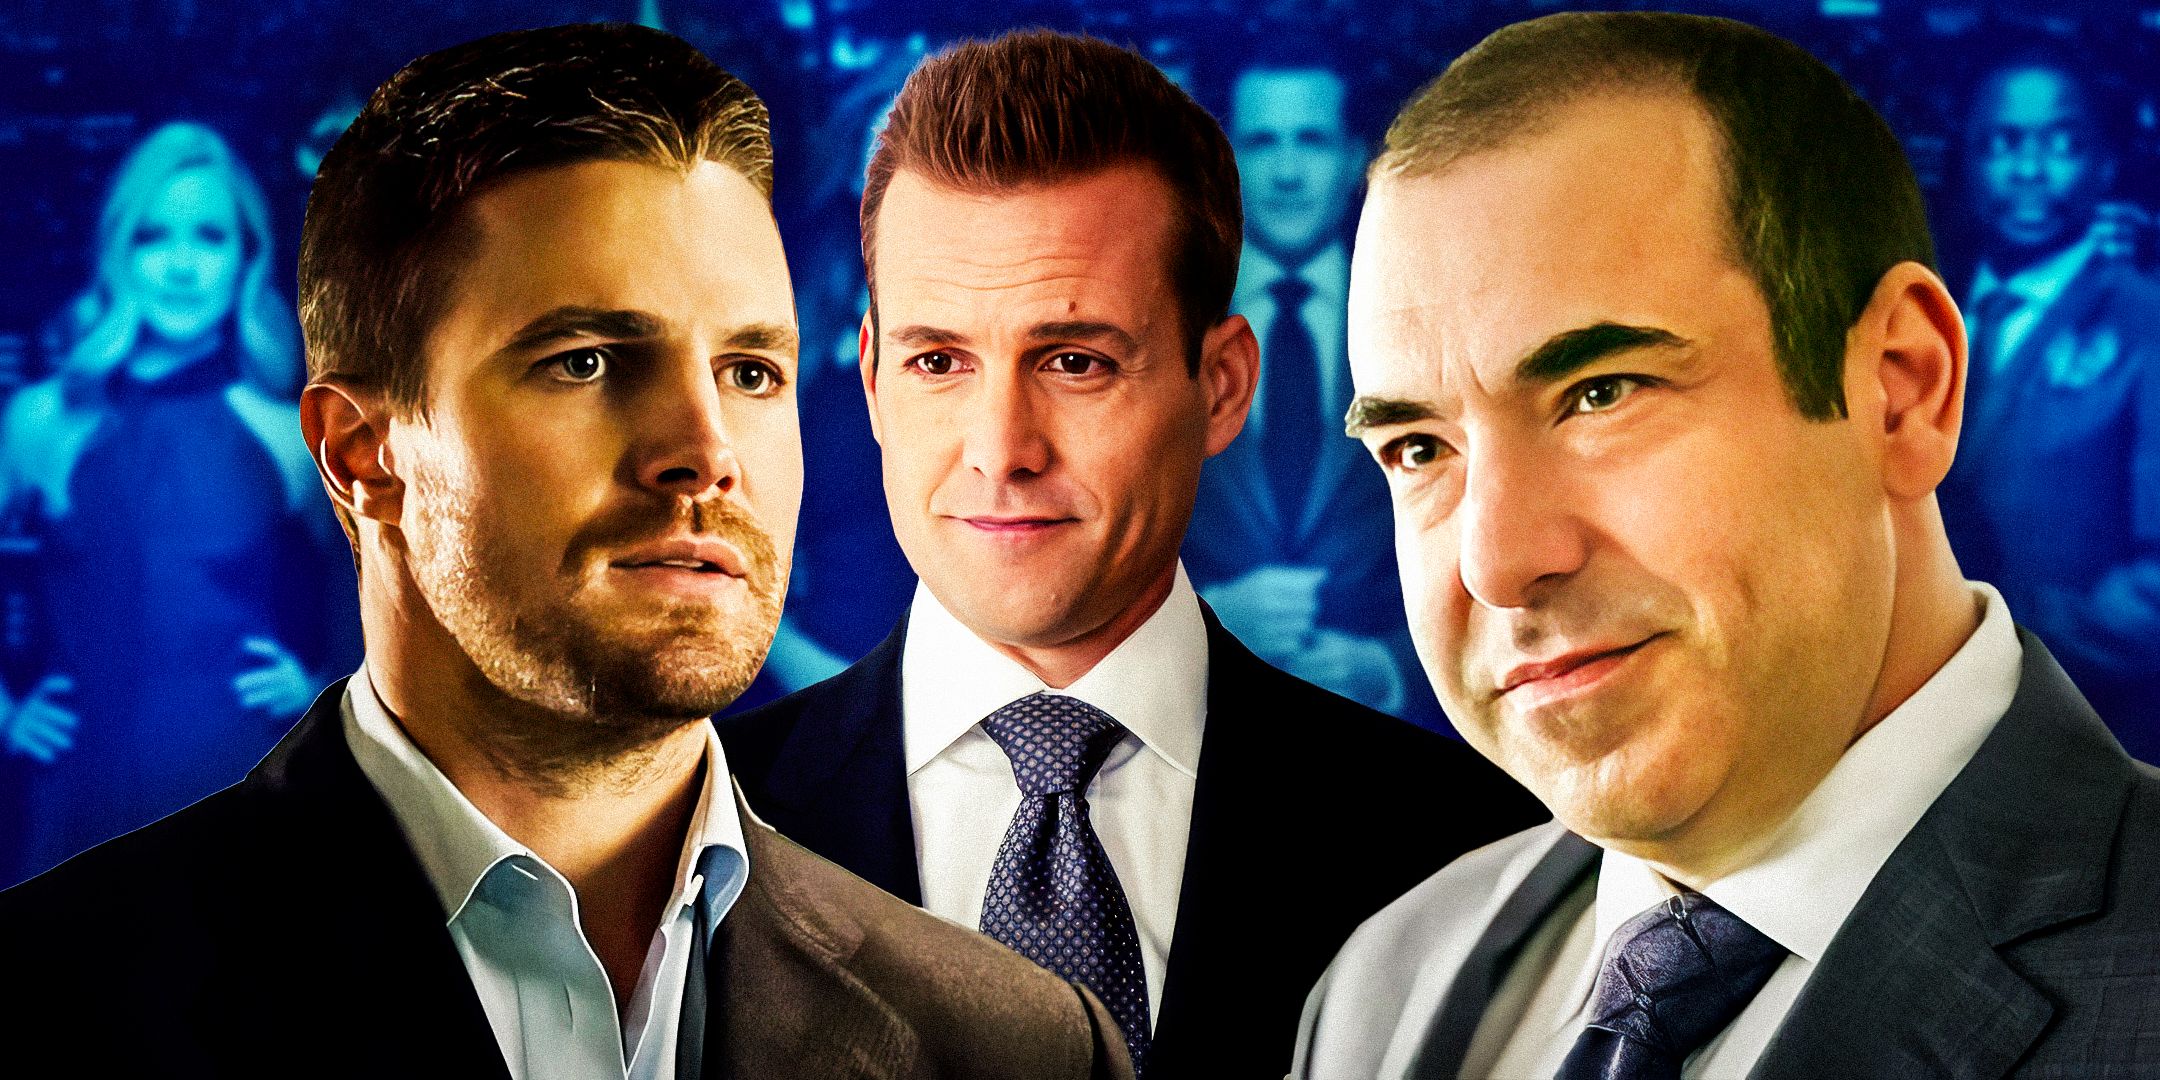 Stephen Amell, Gabriel Macht, and Rick Hoffman in front of a Suits poster